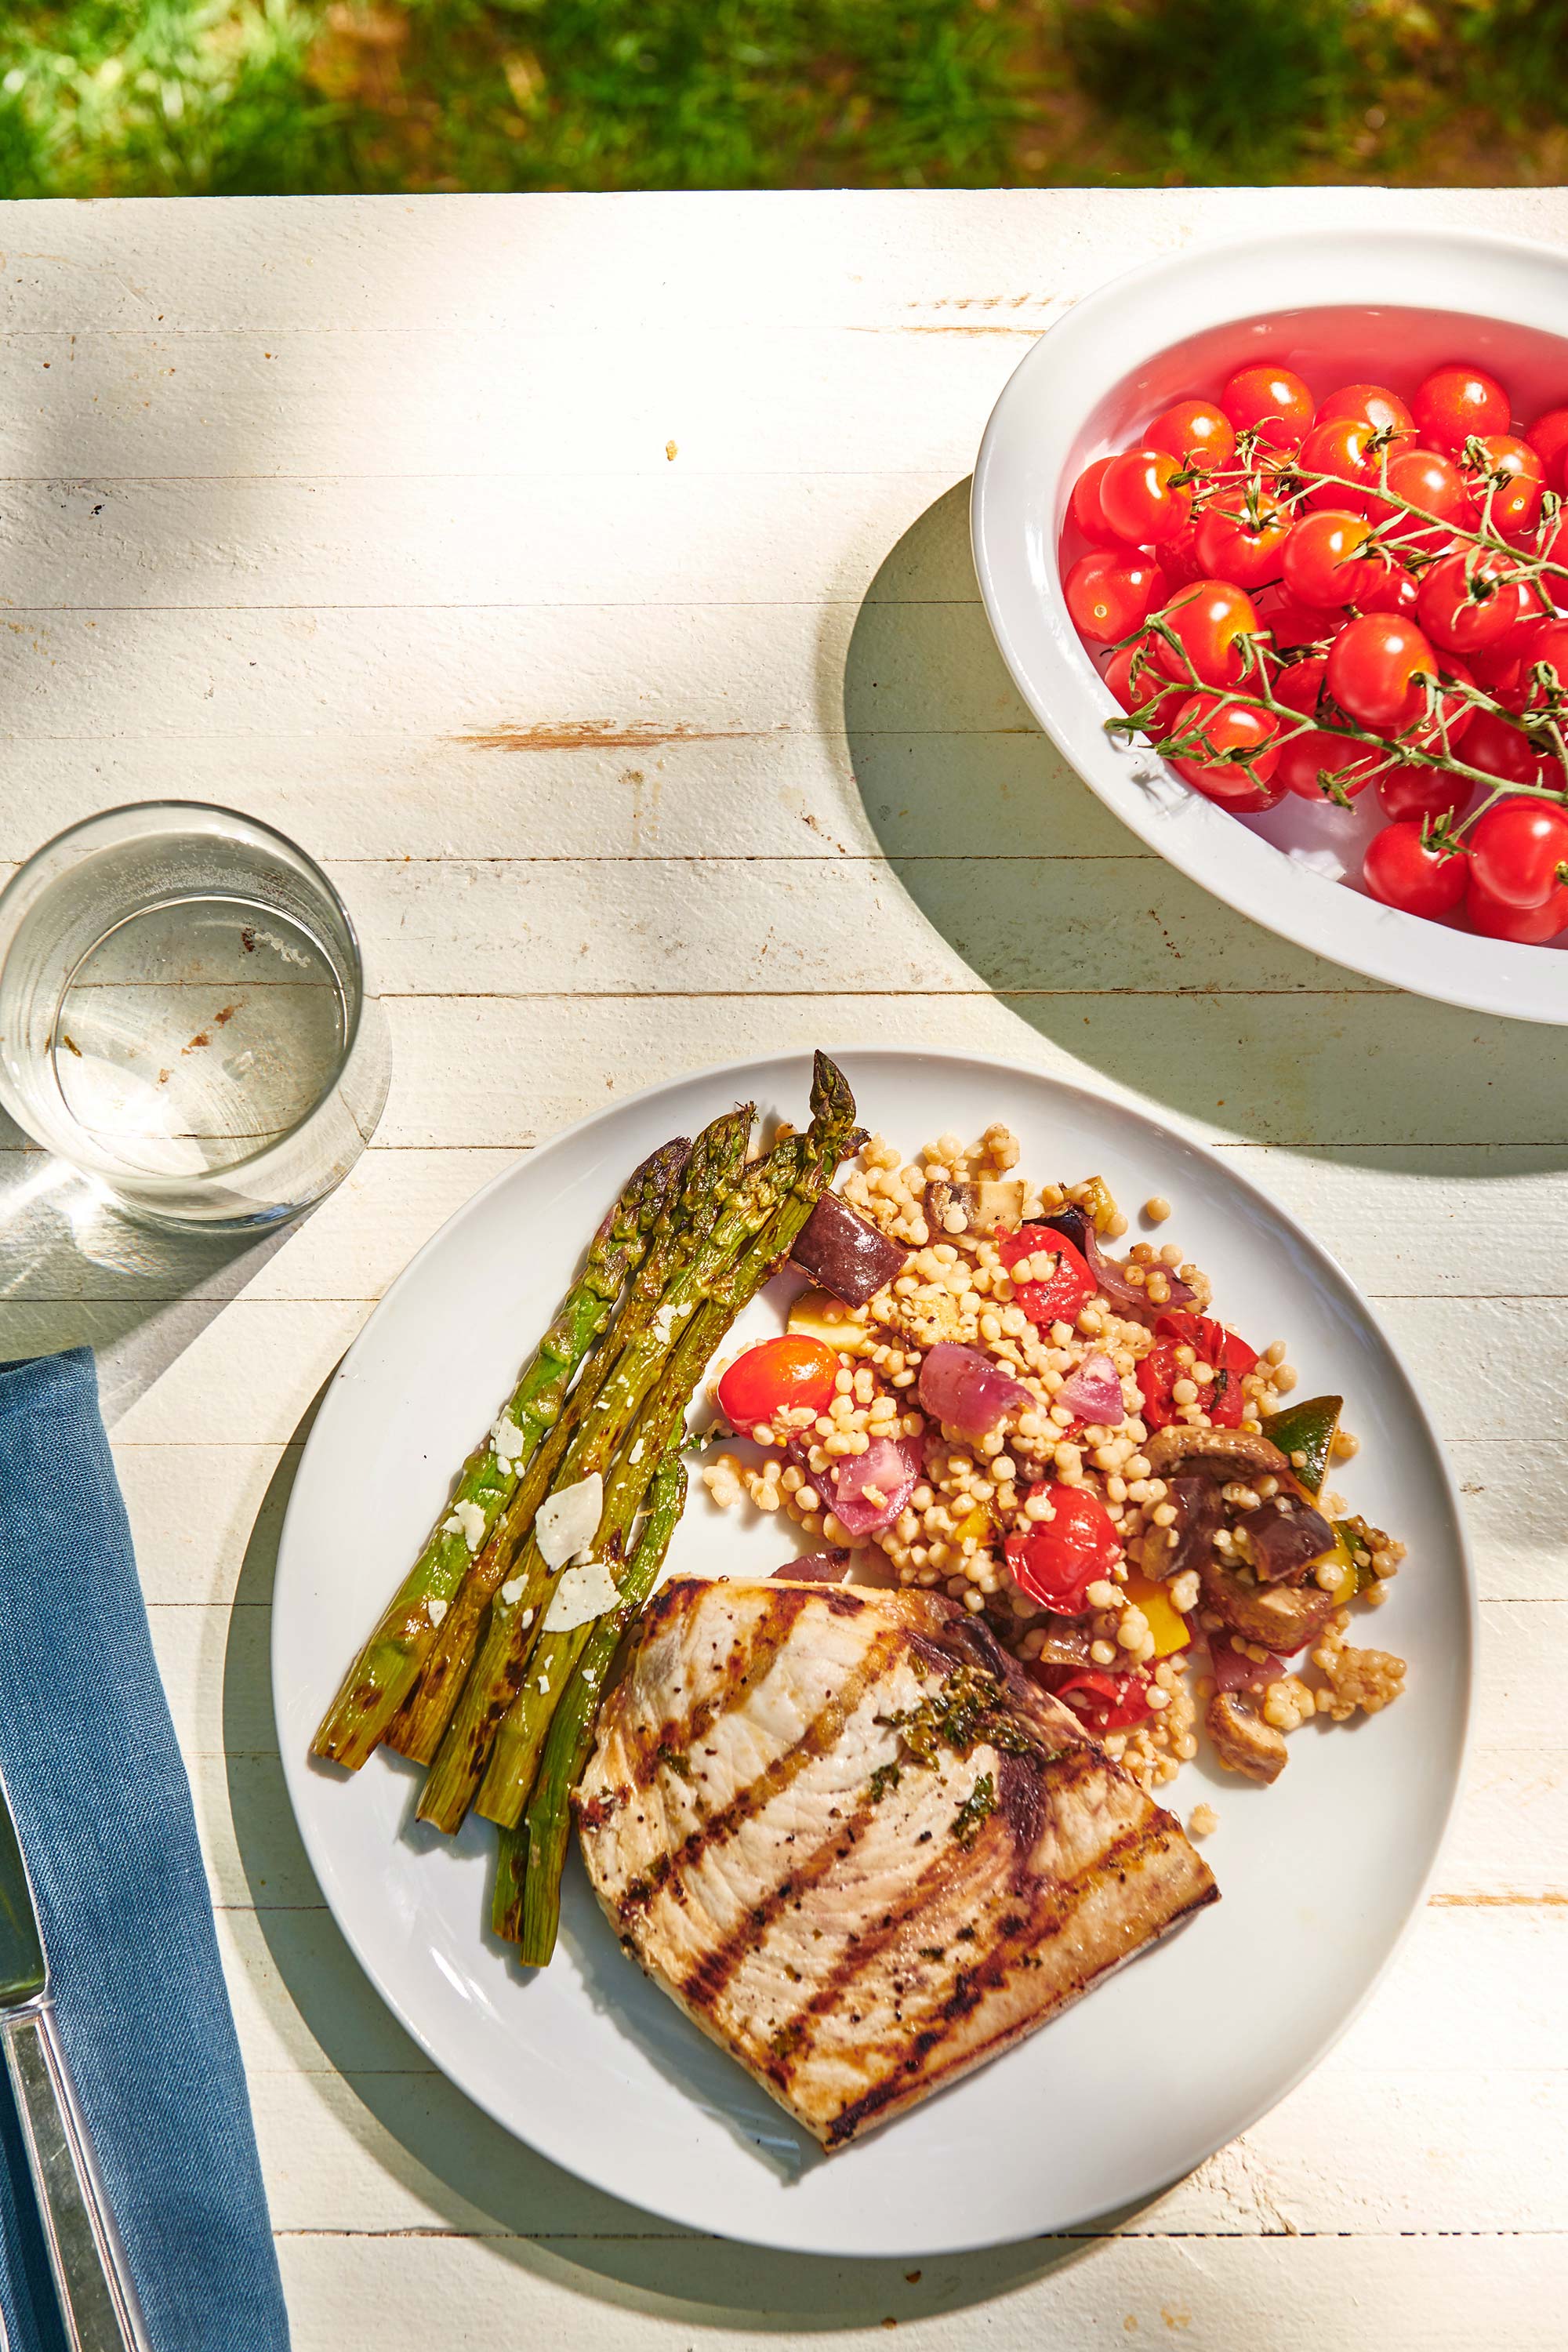 Plate of swordfish, asparagus, and grain salad on a white, wooden table.